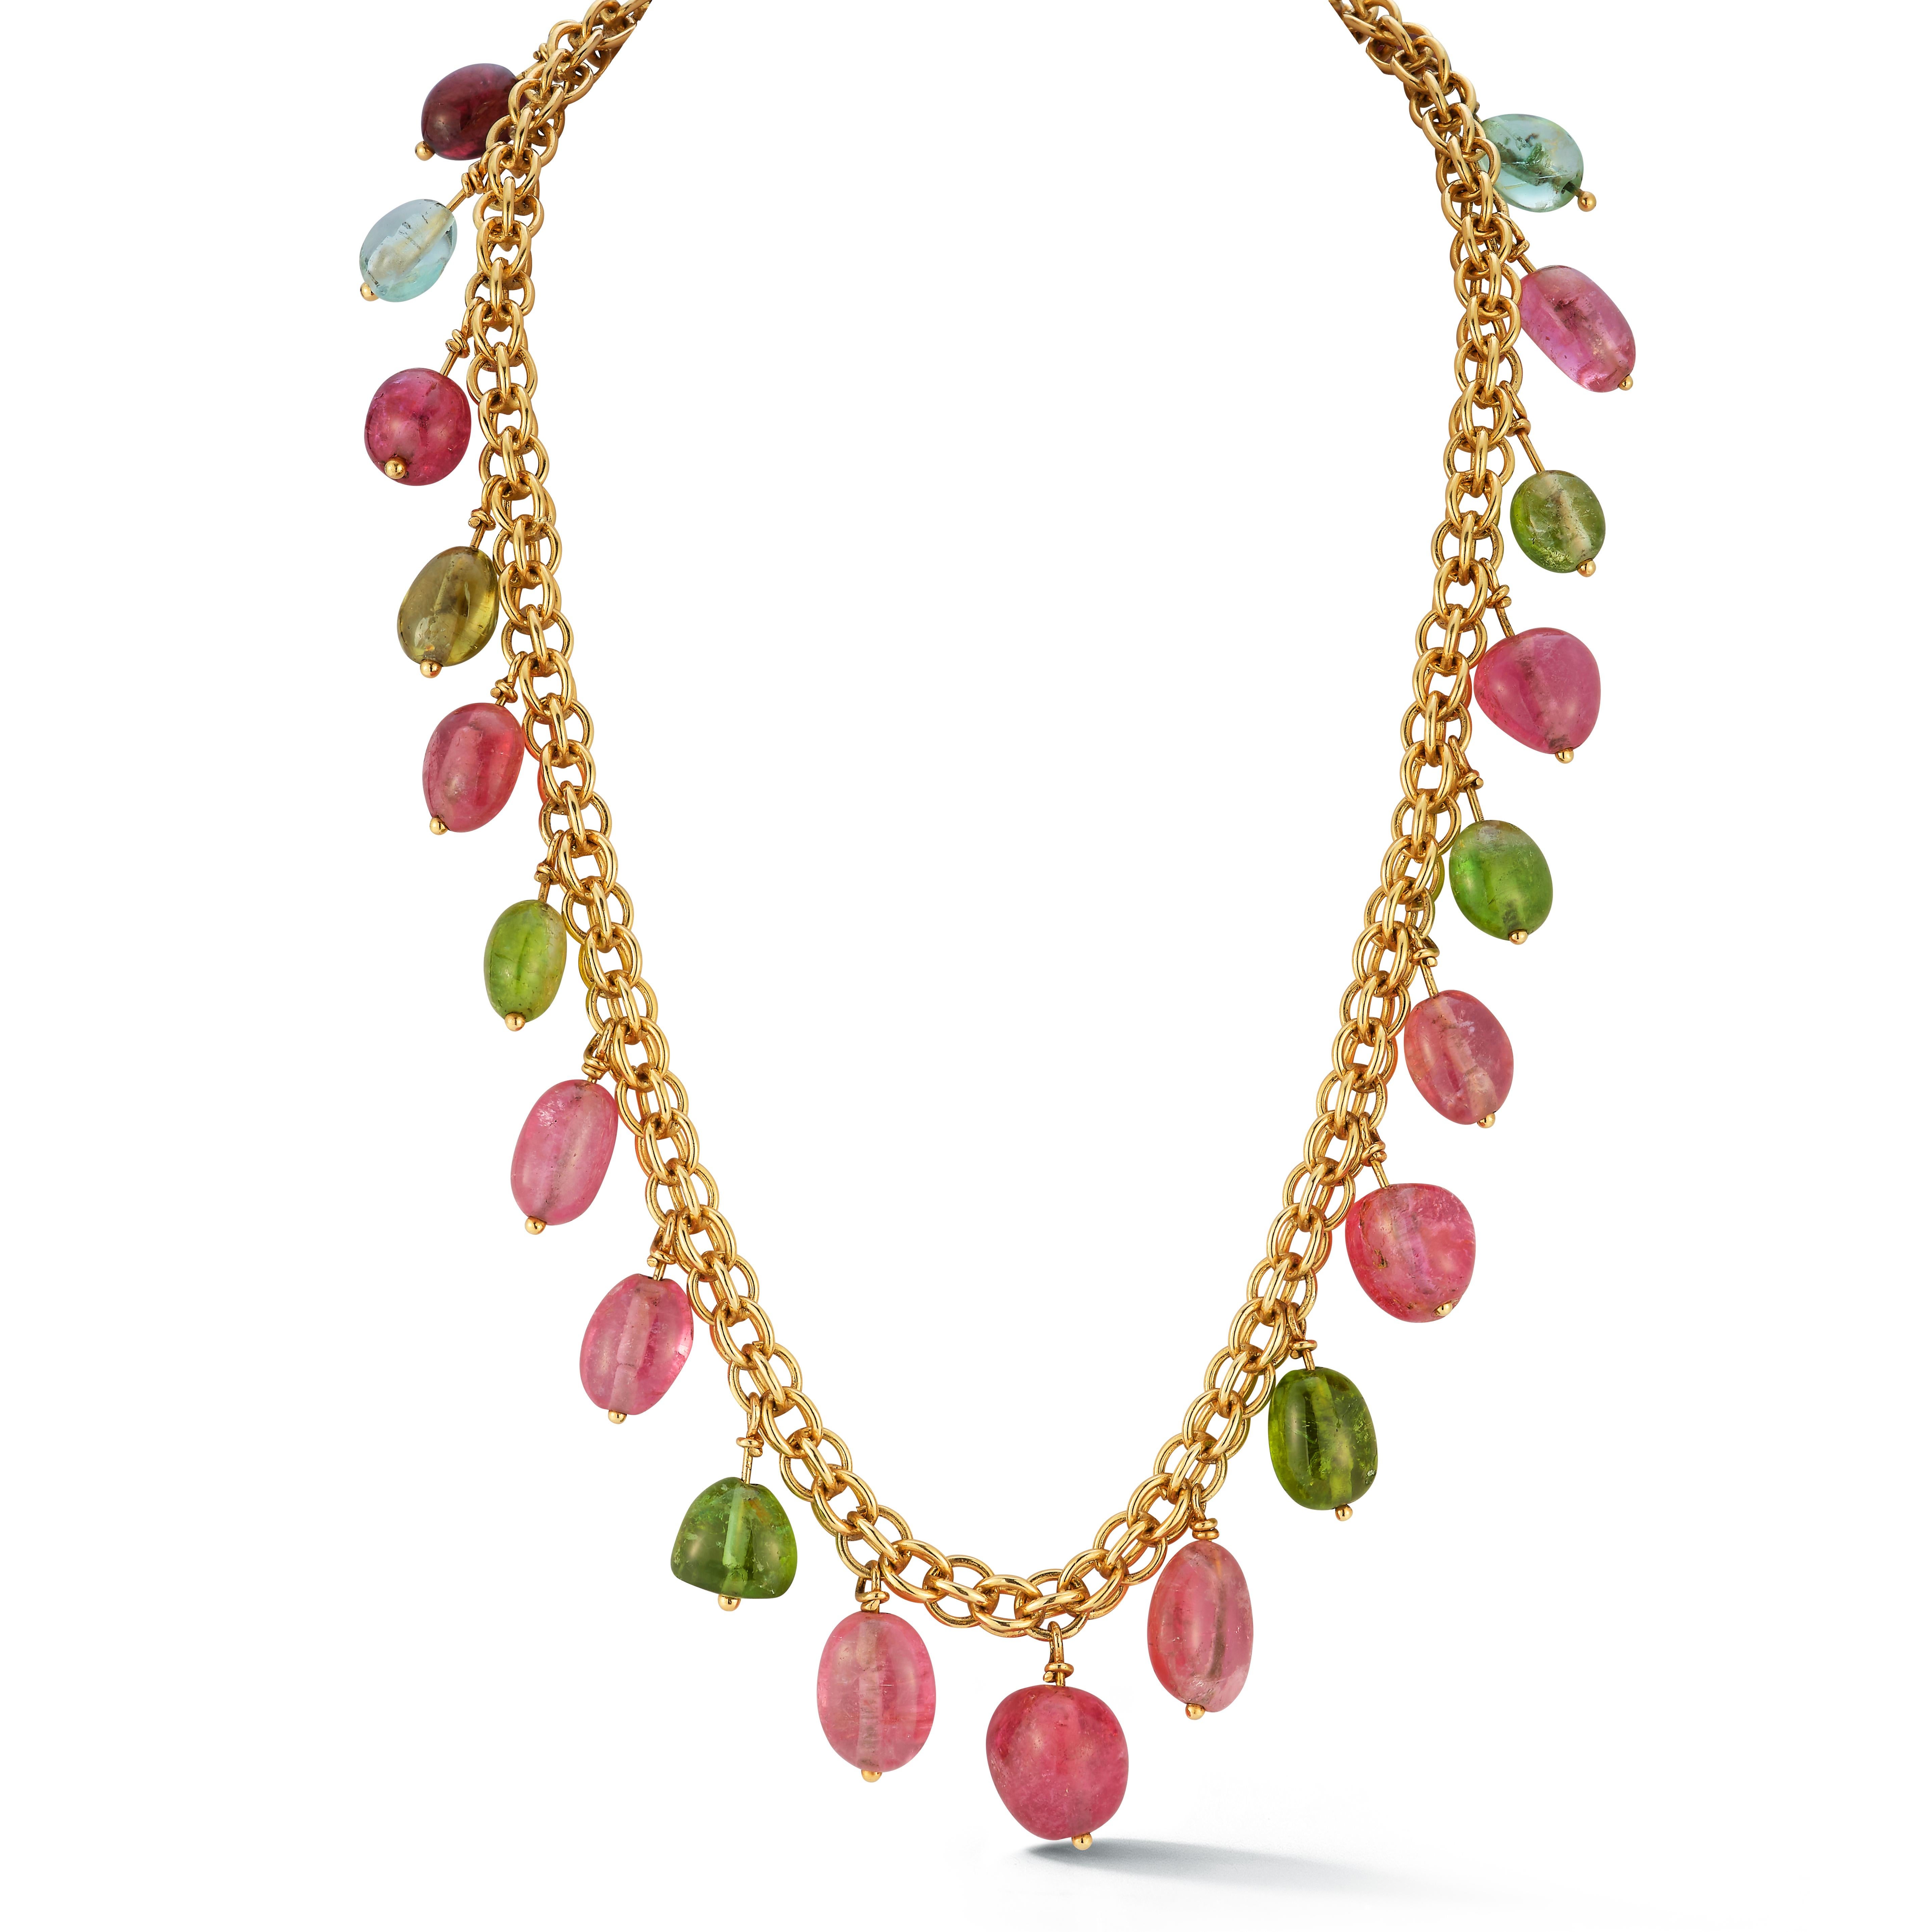 Multi Gem Gold Necklace

Chain necklace with peridot & pink tourmaline beads 

Measurements: 16.5